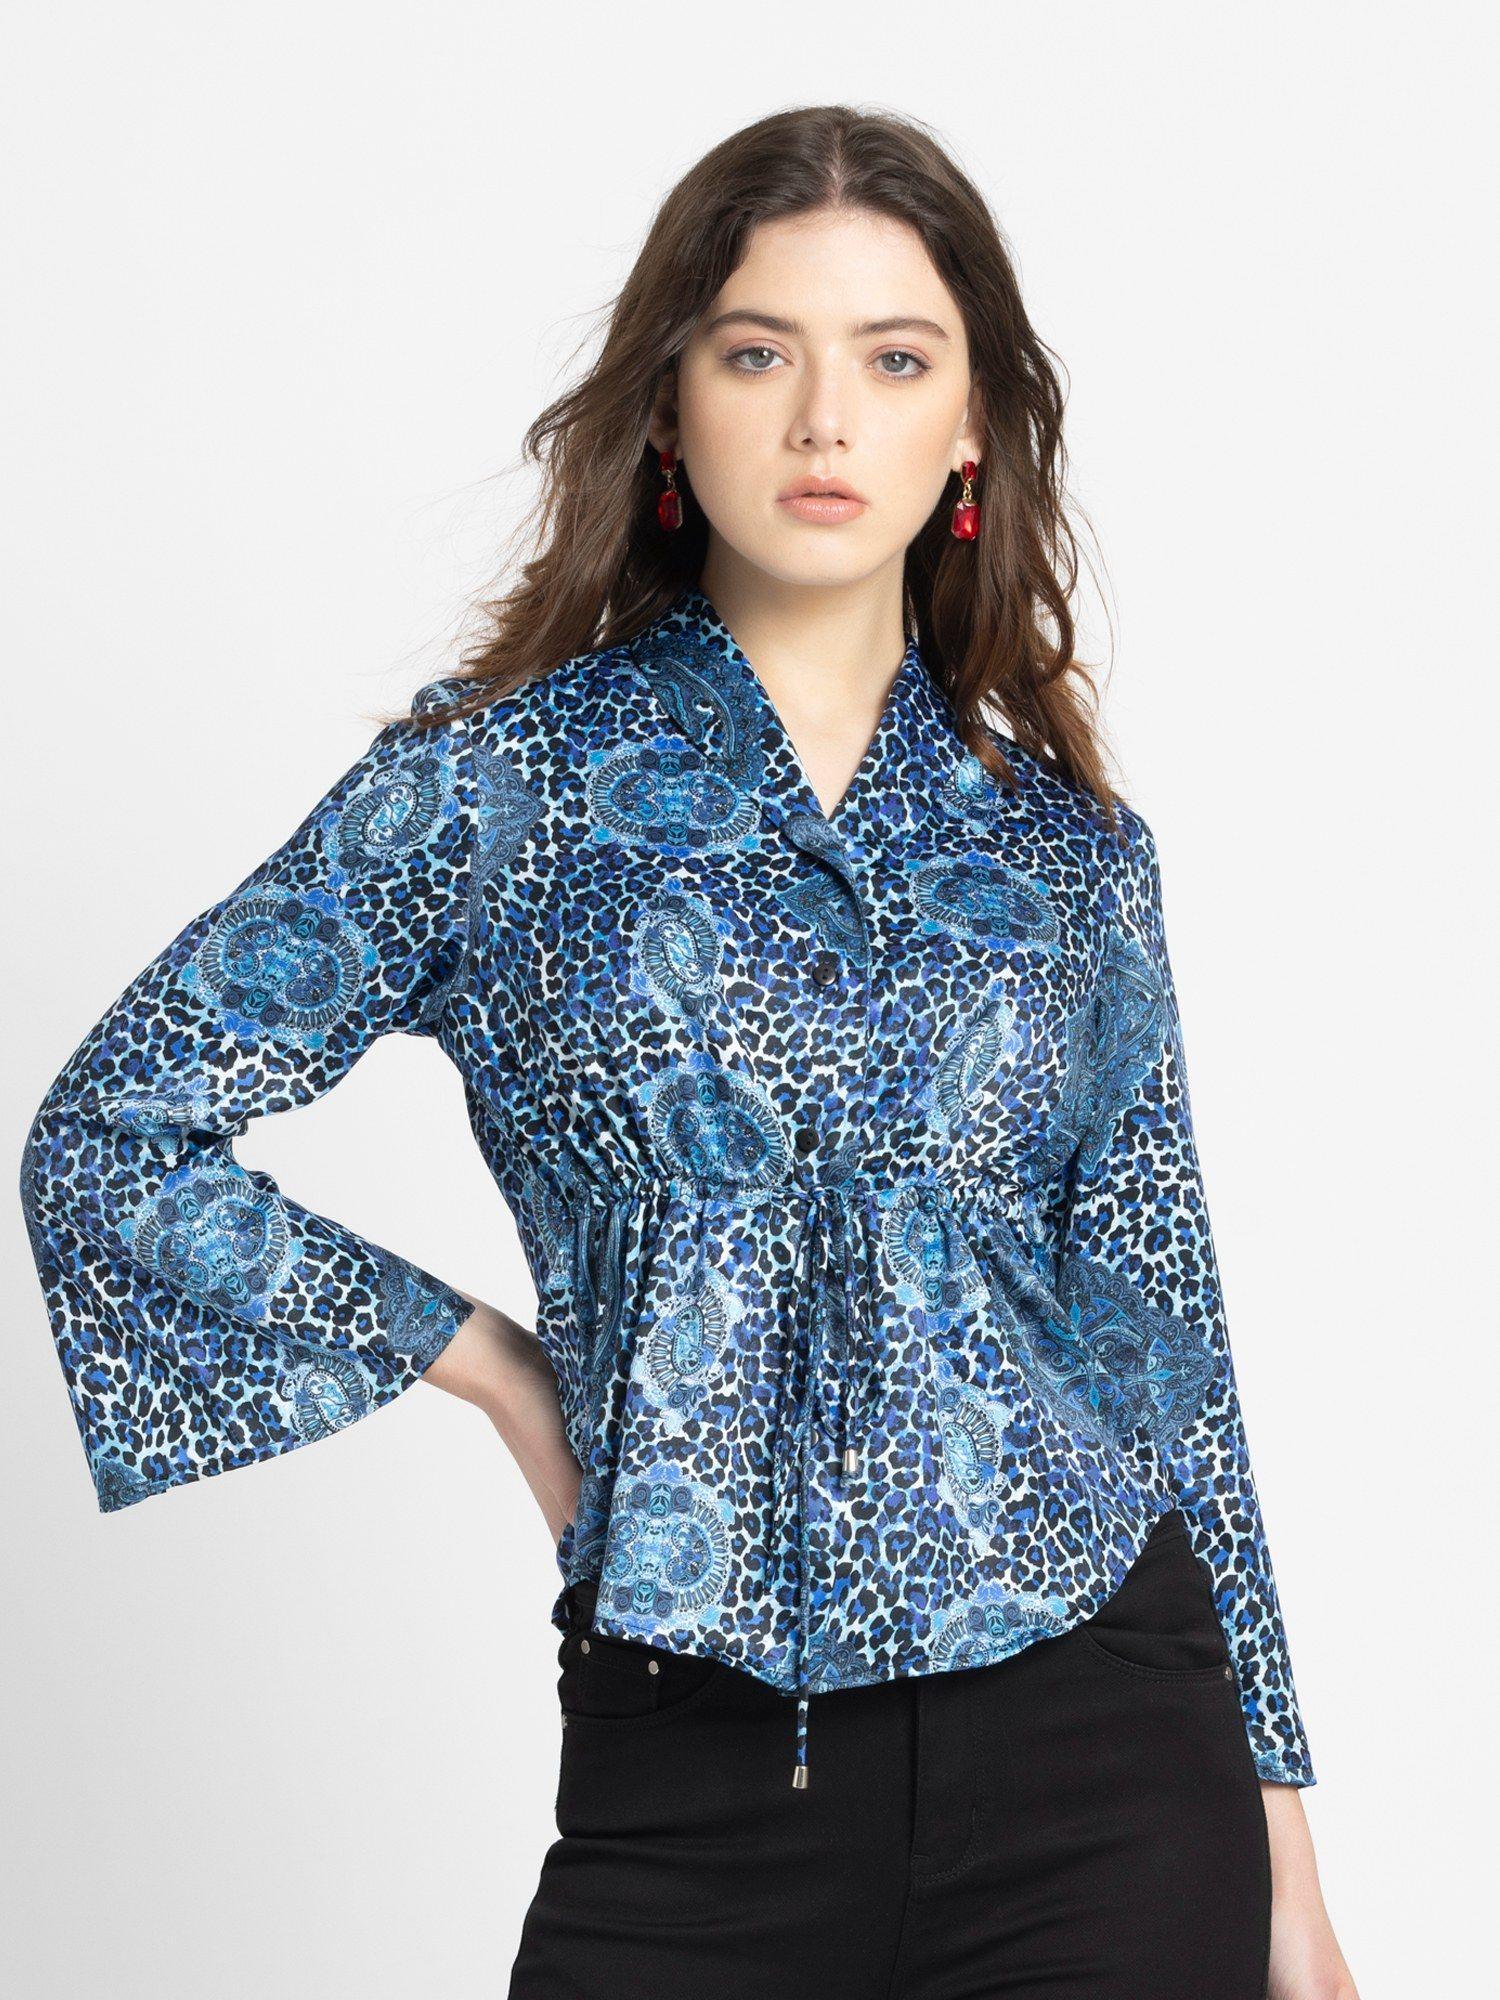 shawl collar blue animal print bell sleeves casual shirt for women